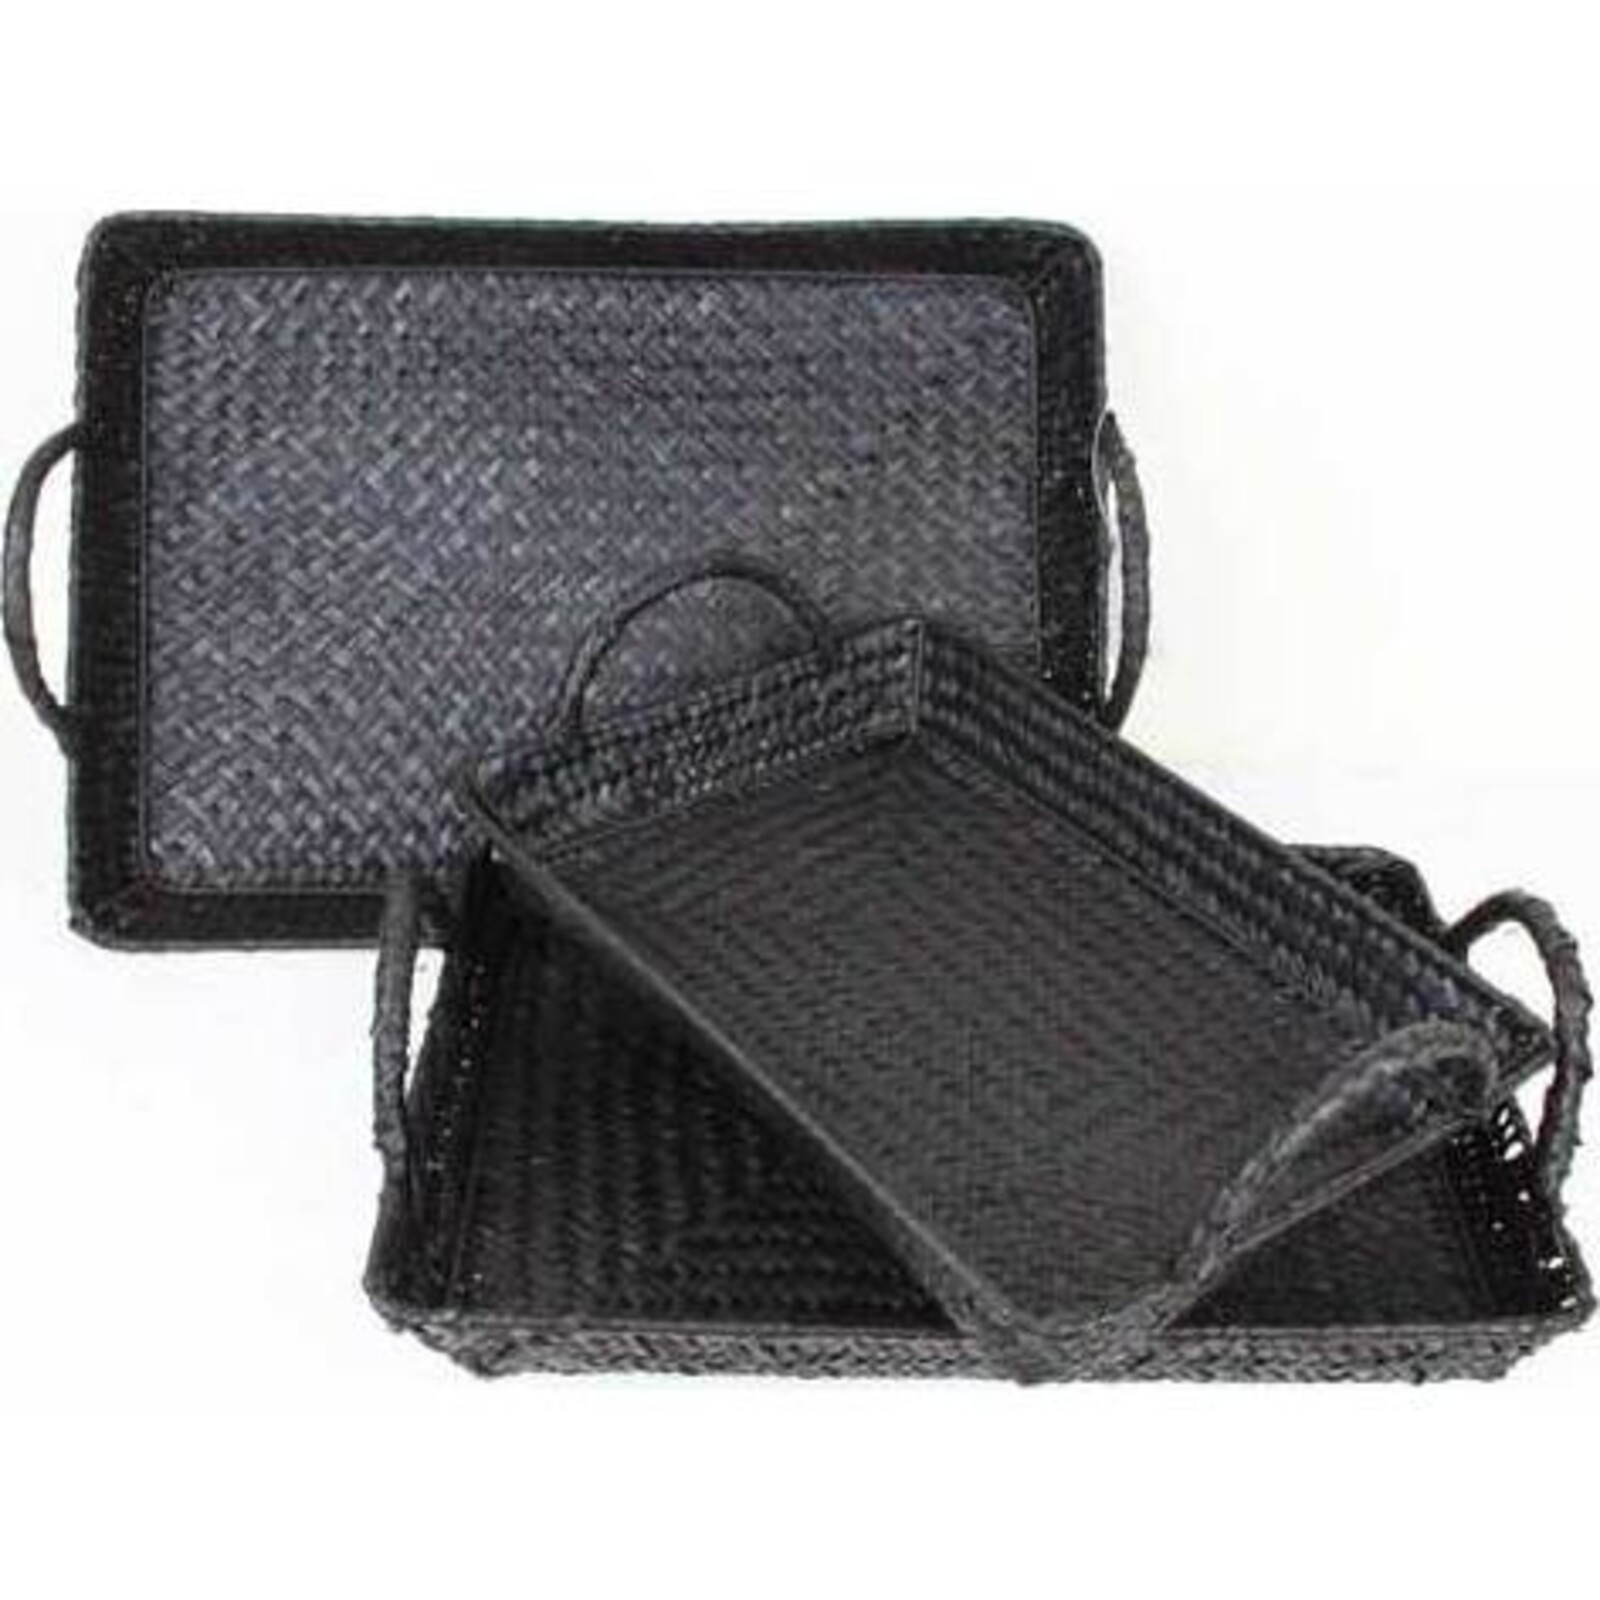 Shallow Woven Trays Black S/3